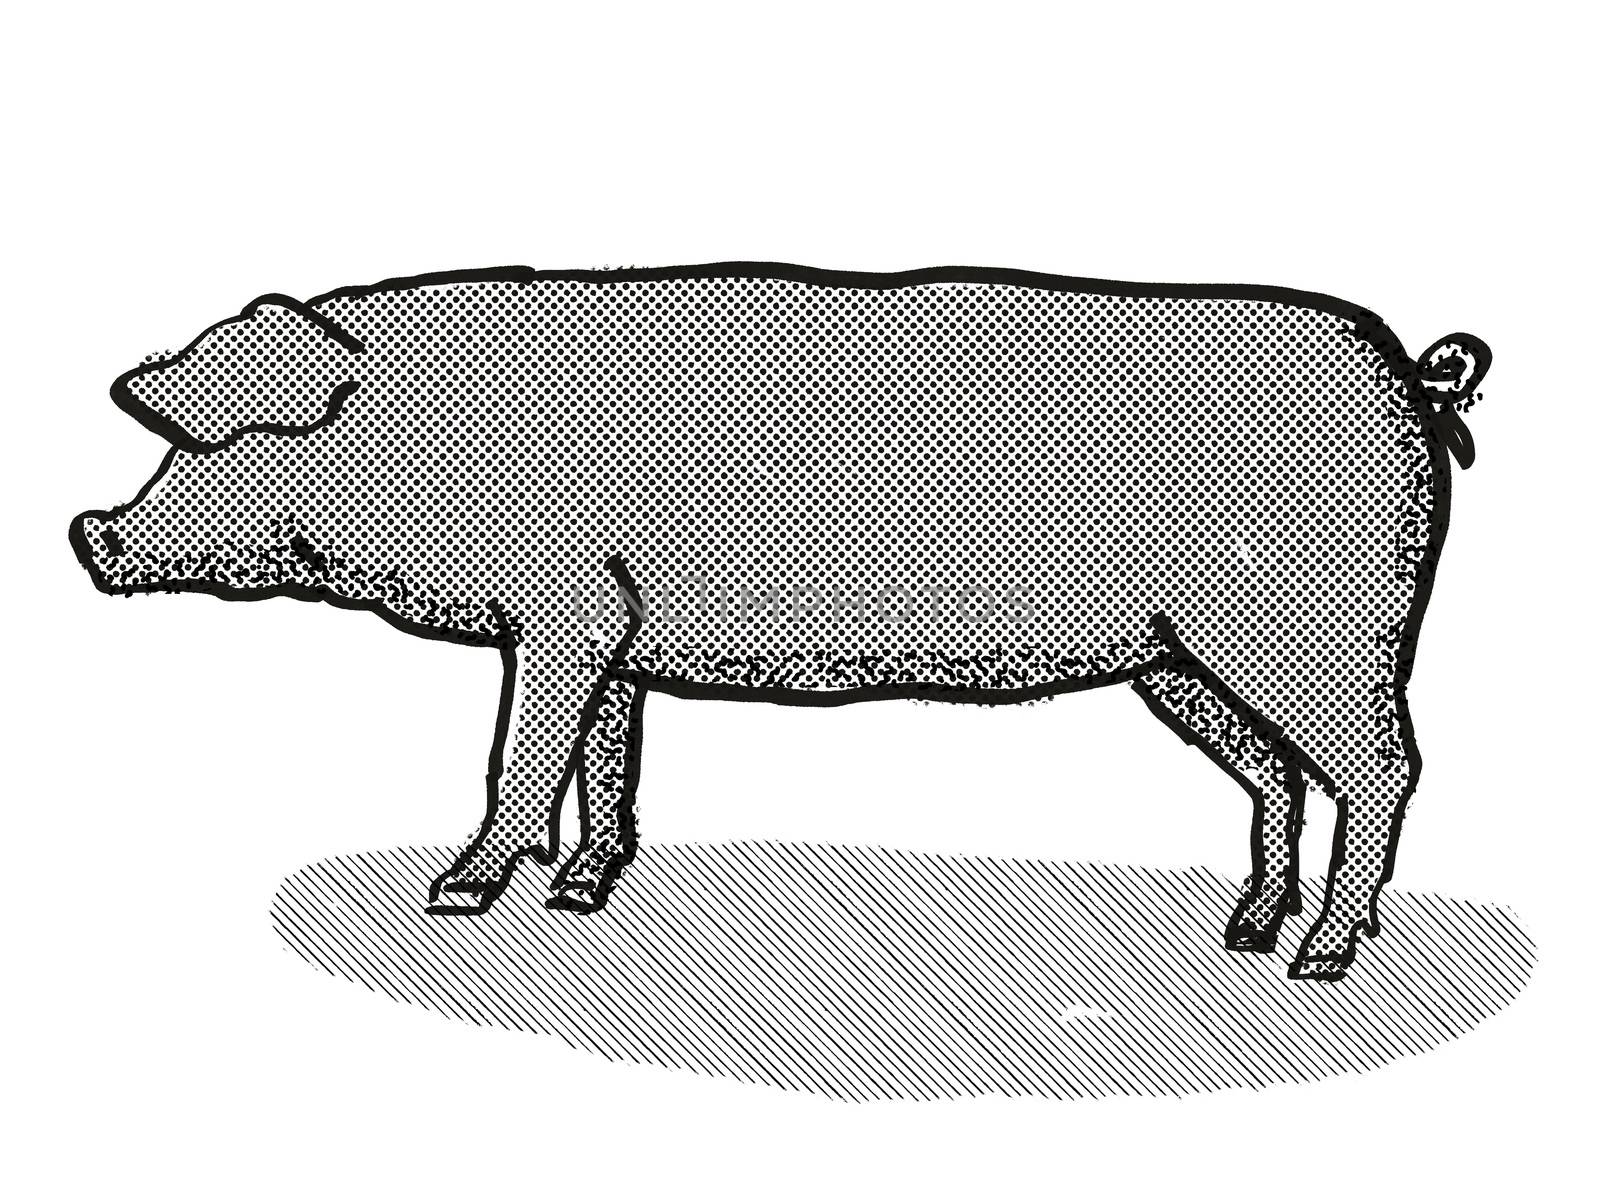 Retro cartoon style drawing of a Large Black sow or boar, a pig breed viewed from side on isolated white background done in black and white